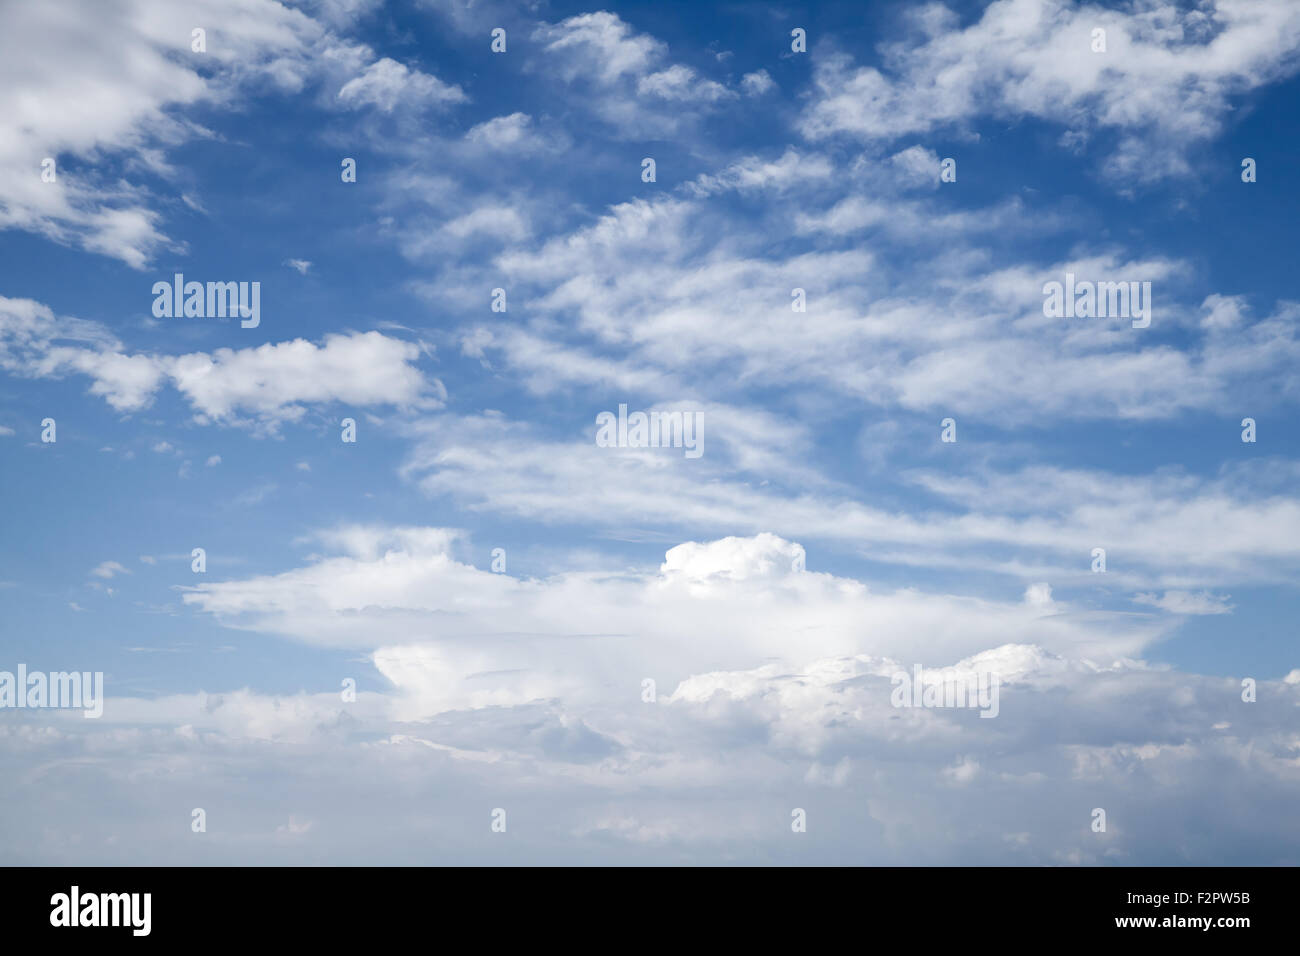 Natural blue cloudy sky background photo texture Stock Photo